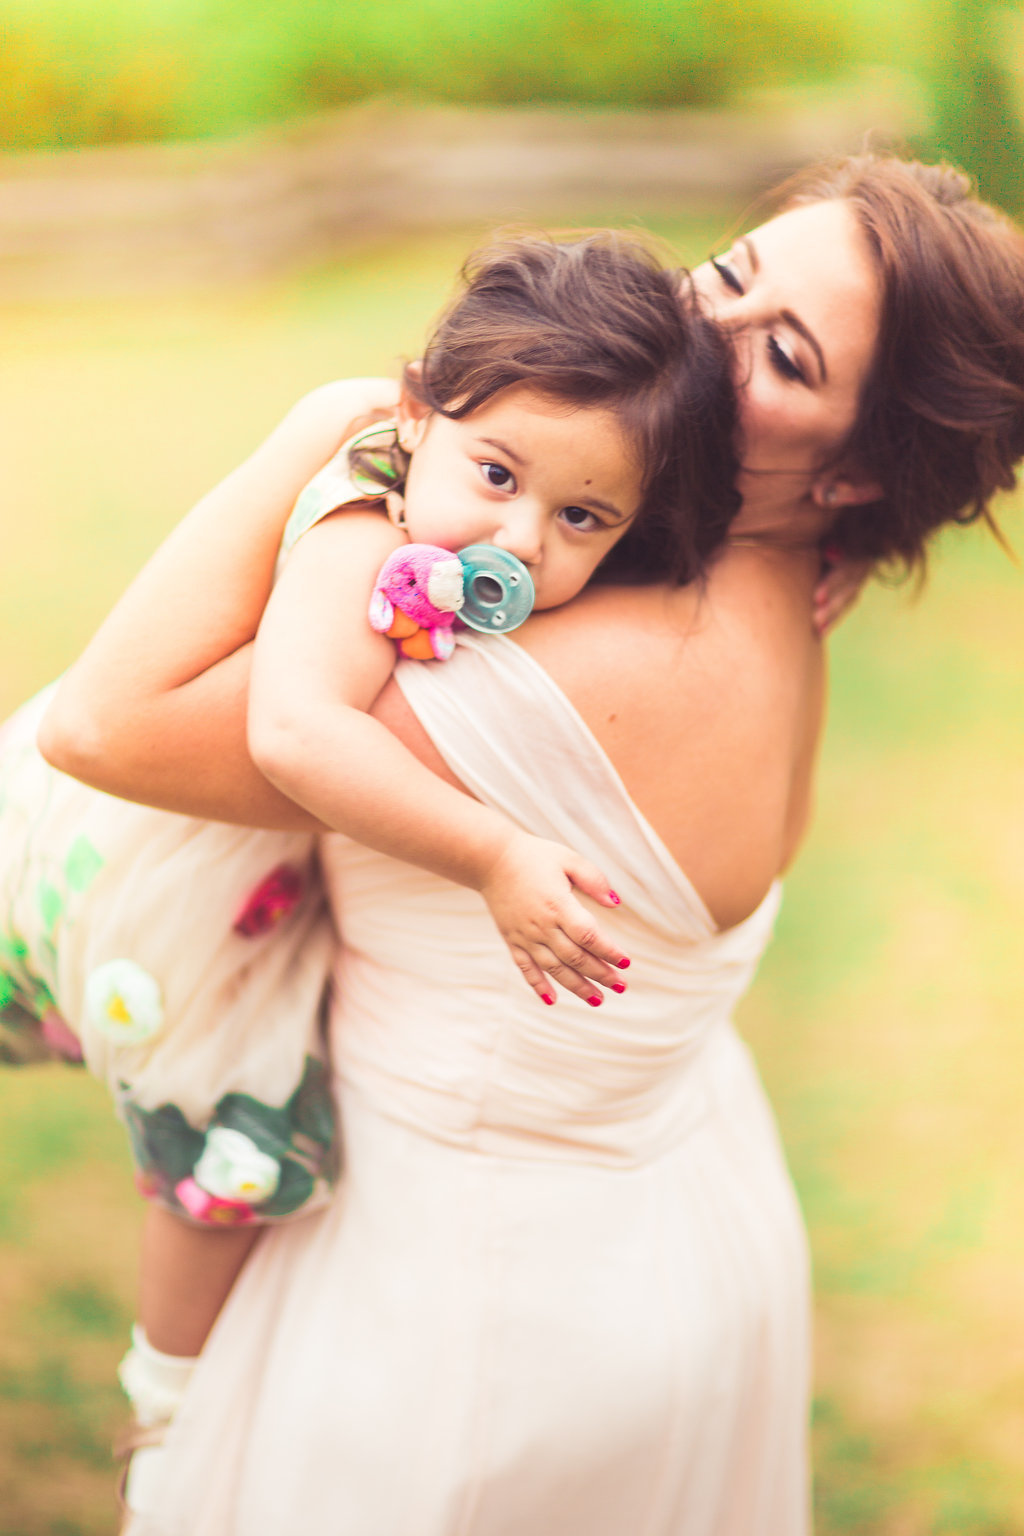 Wedding Photograph Of Woman in Dress Carrying a Toddler Los Angeles